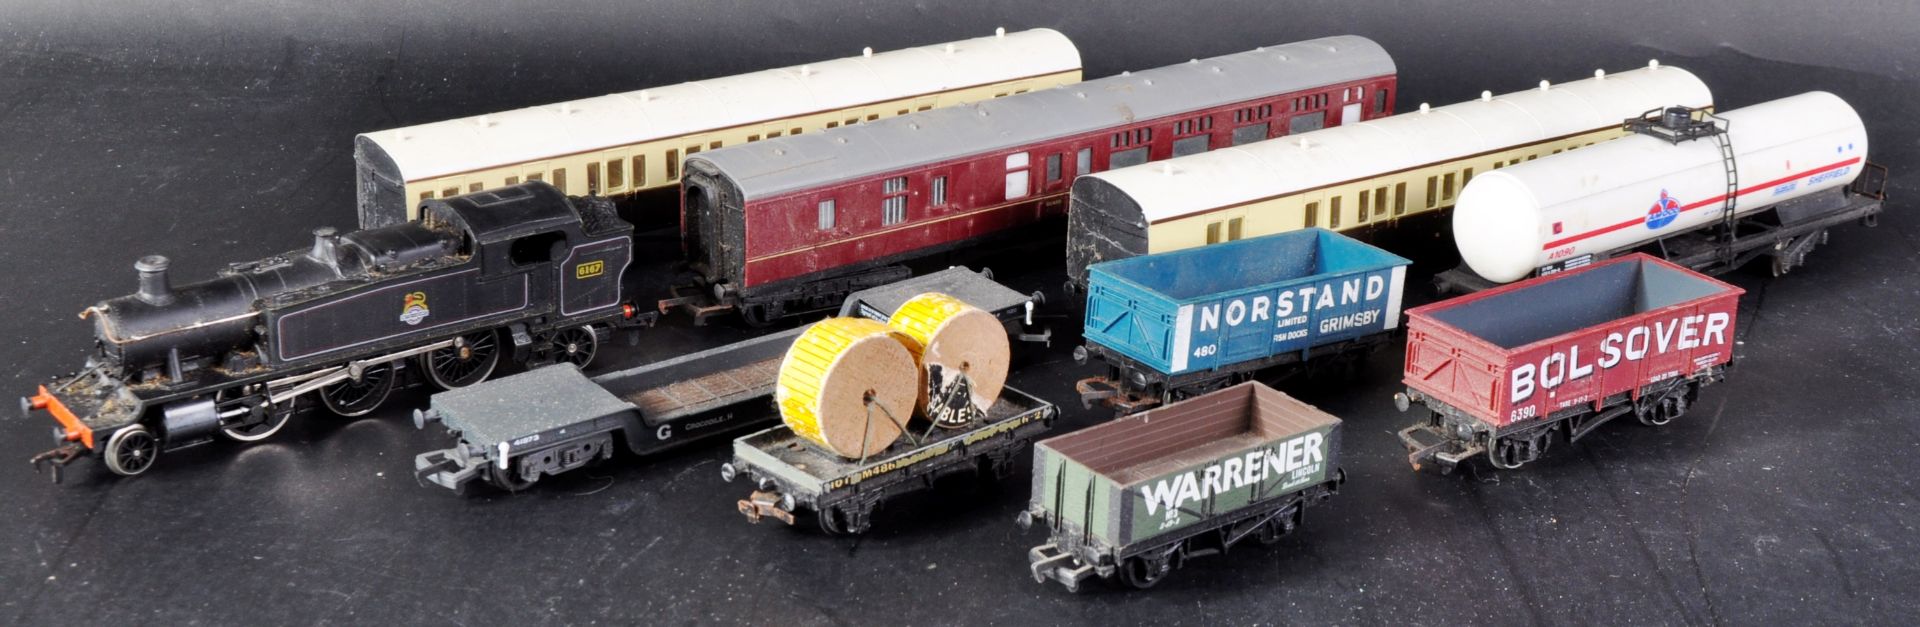 COLLECTION OF ASSORTED 00 GAUGE MODEL RAILWAY LOCO & CARRIAGES